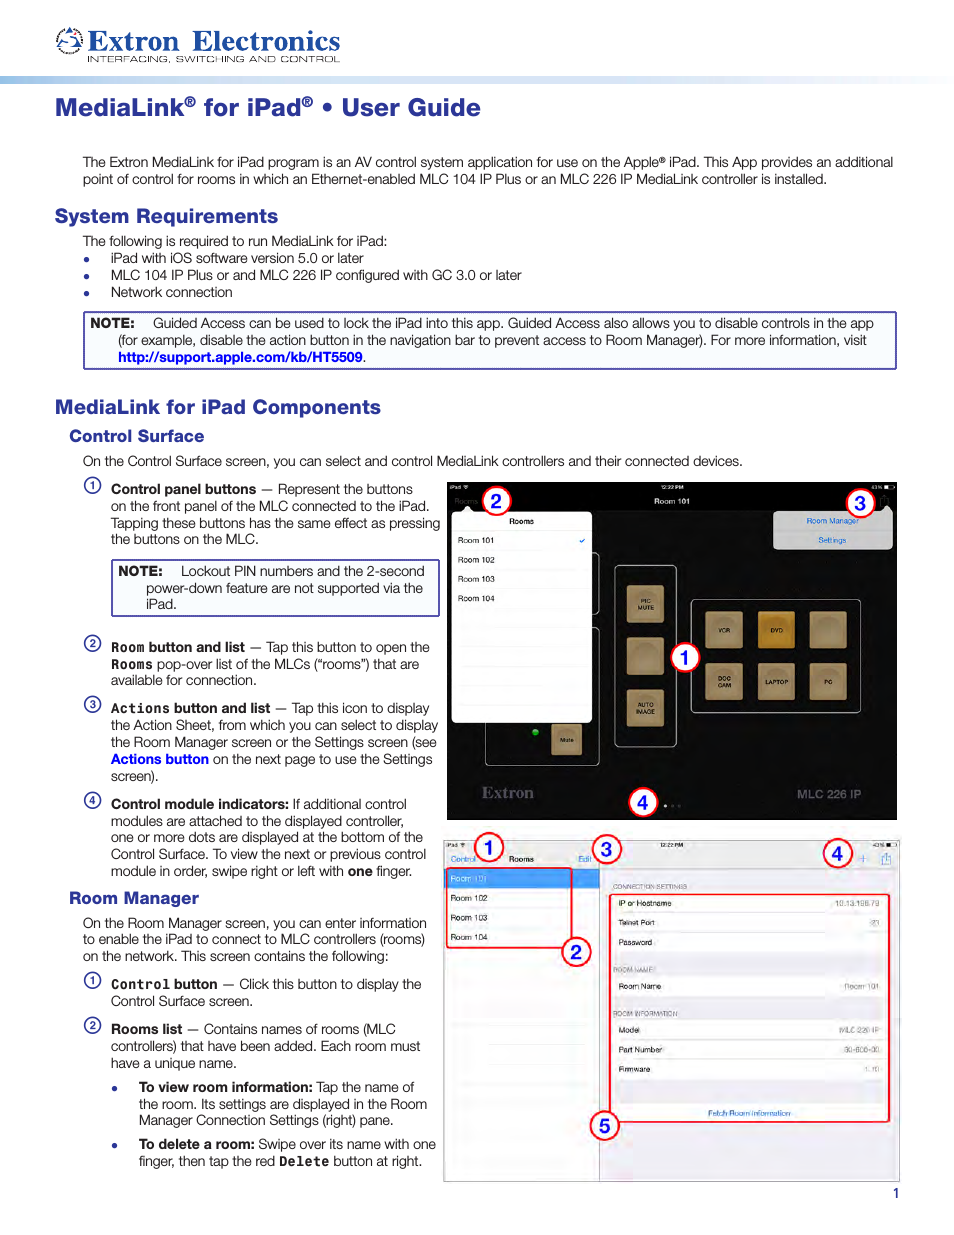 MediaLink for iPad User Guide